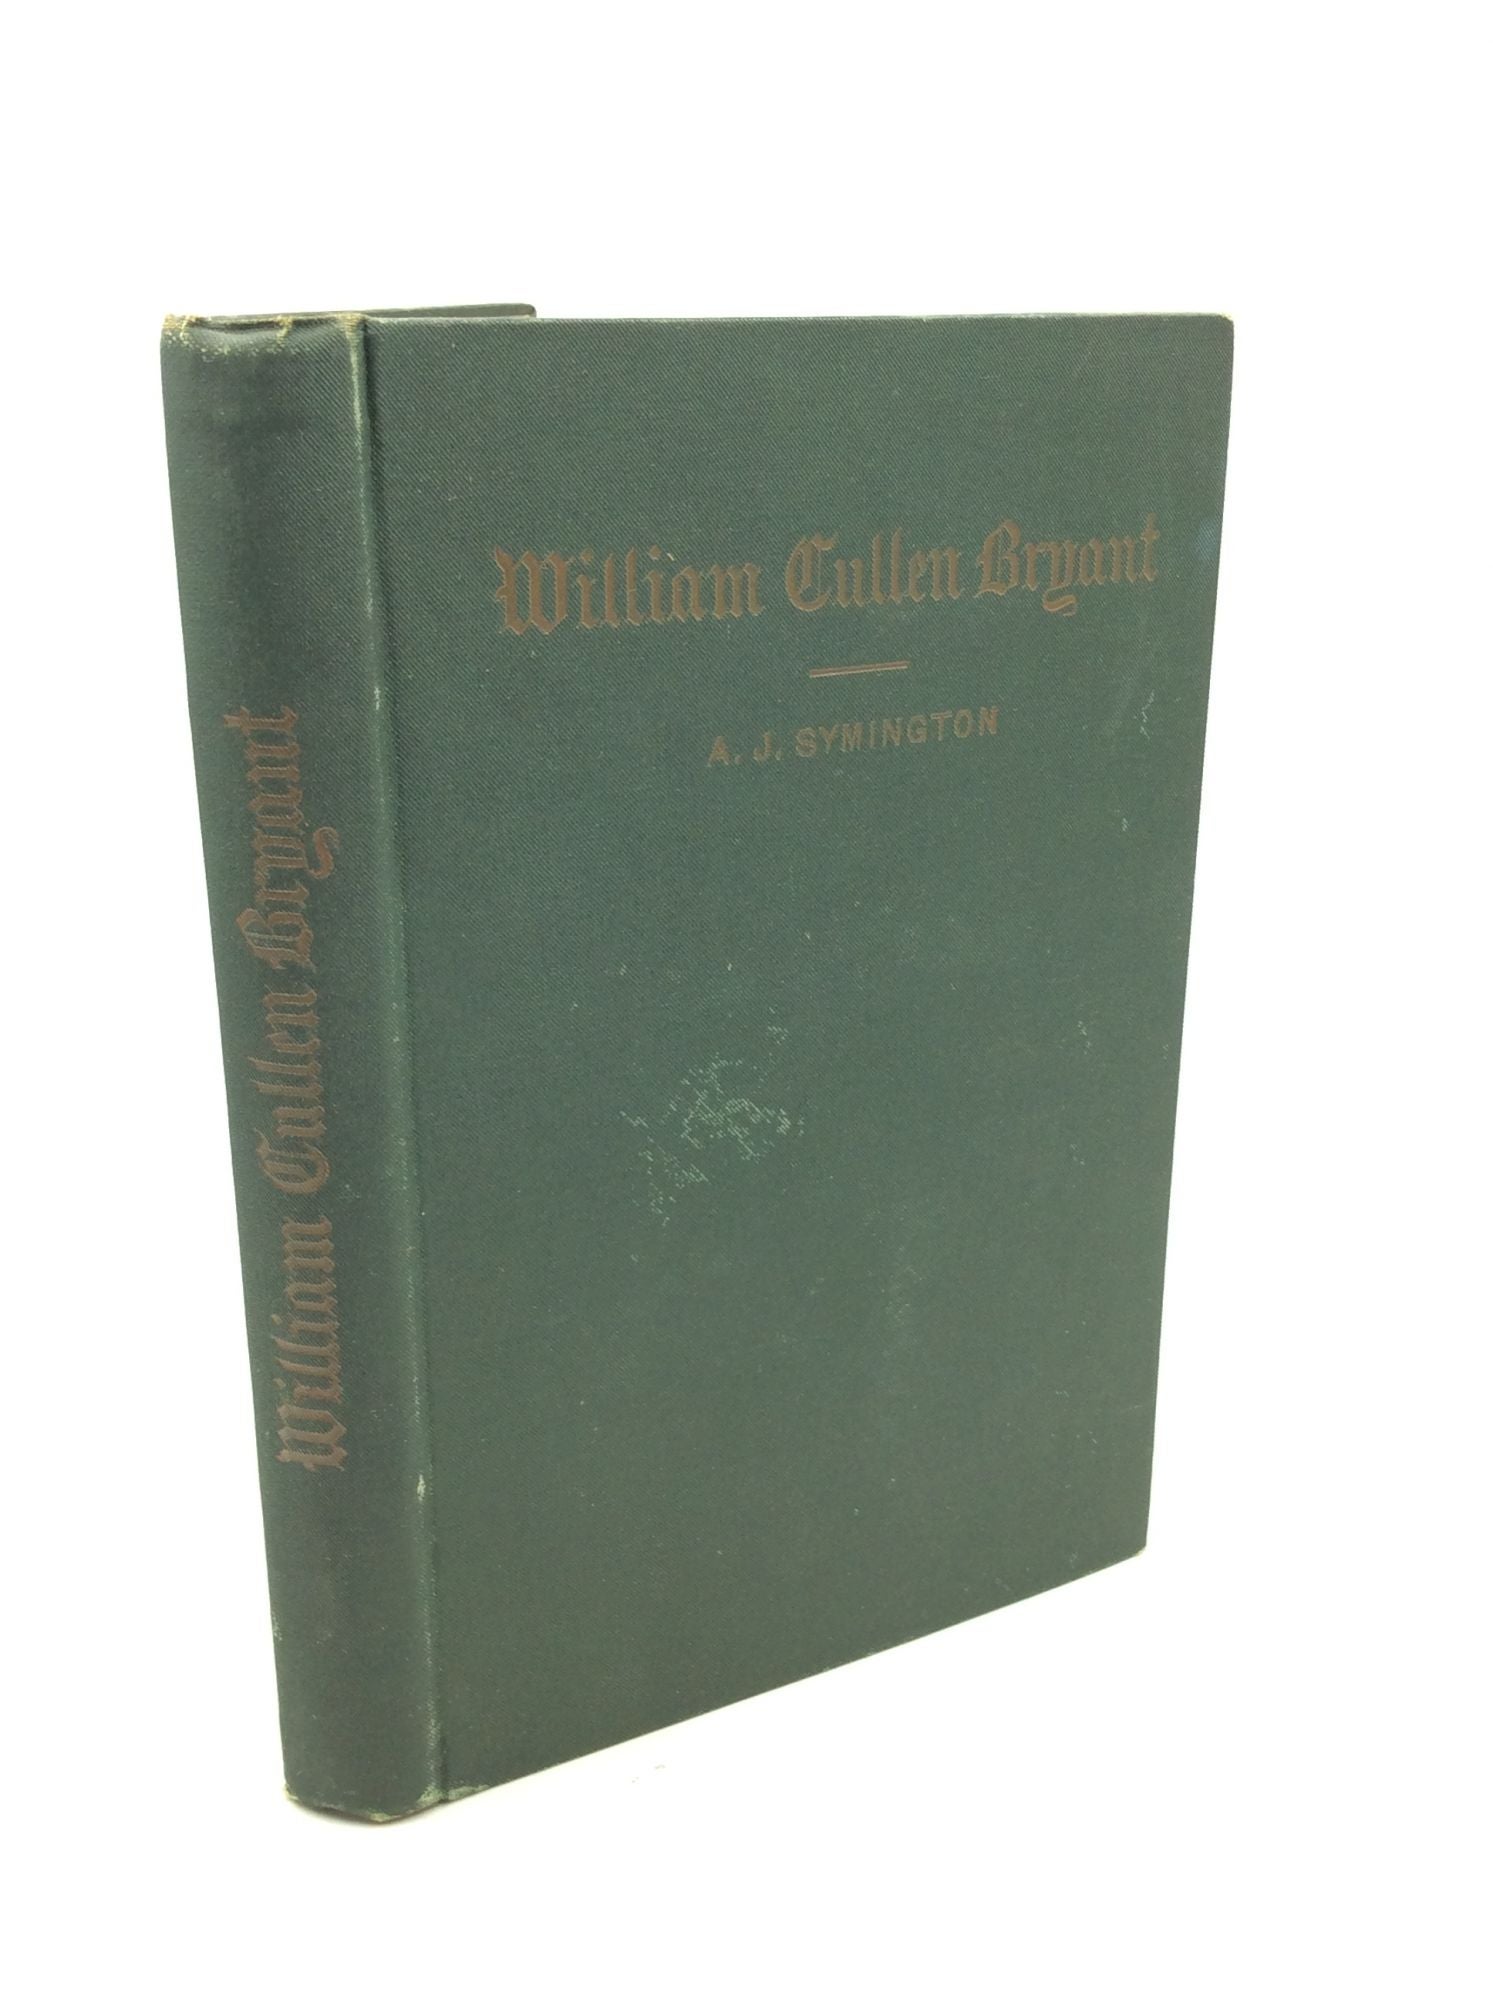 Andrew James Symington - William Cullen Bryant: A Biographical Sketch with Selections from His Poems and Other Writings